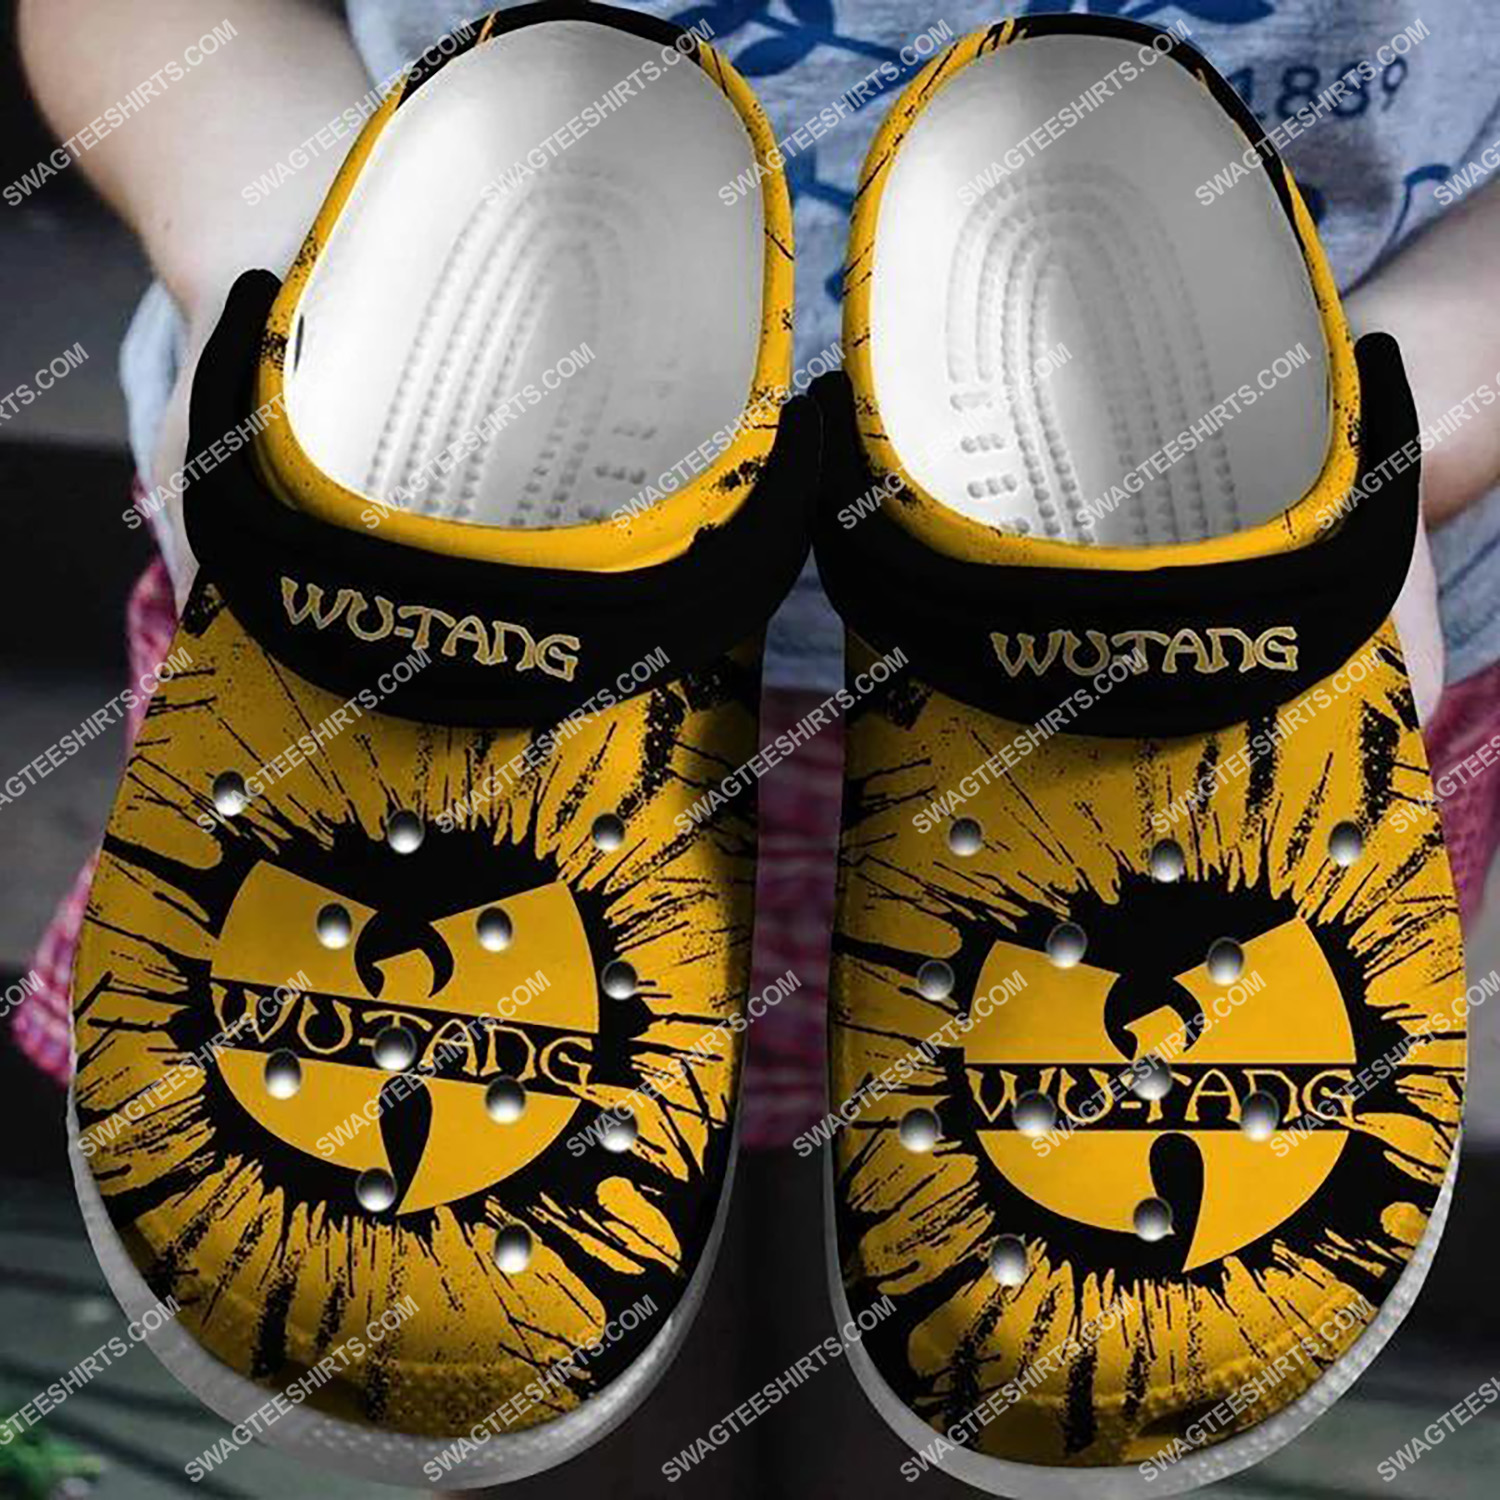 [special edition] wu-tang clan all over printed crocs – maria